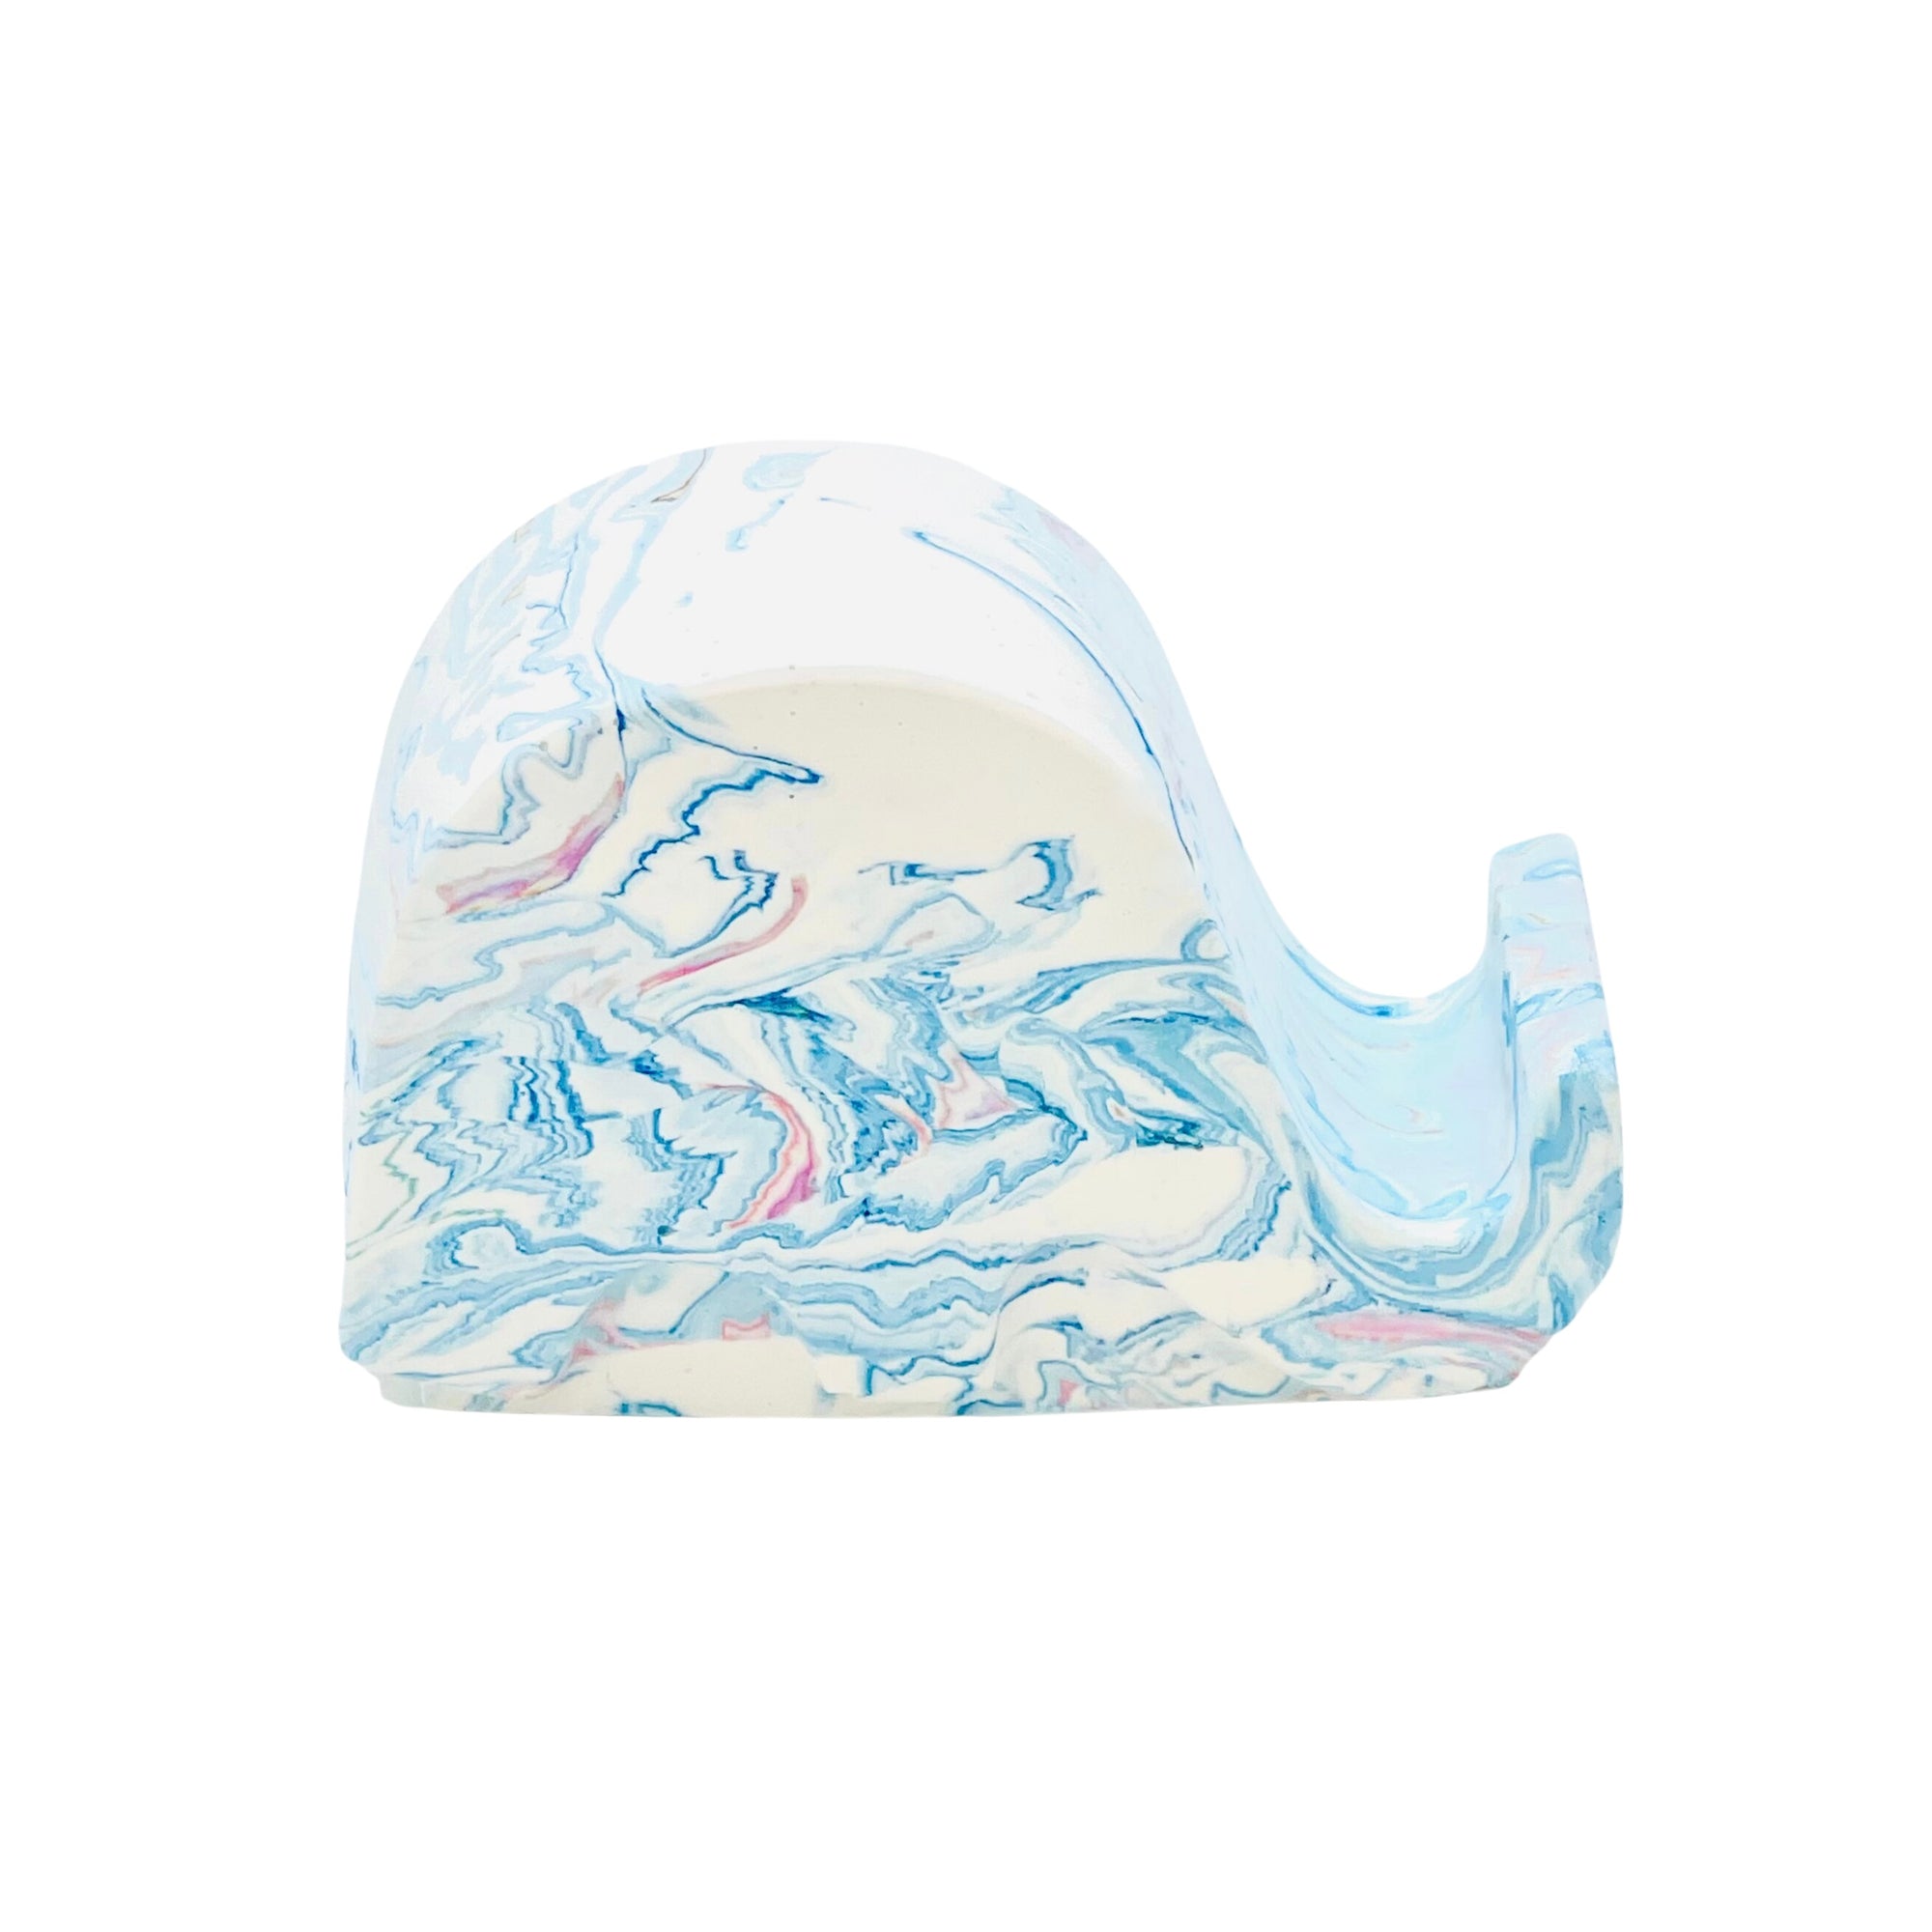 A Jesmonite elephant mobile phone stand measuring 6.5cm in length marbled with baby blue pigment.